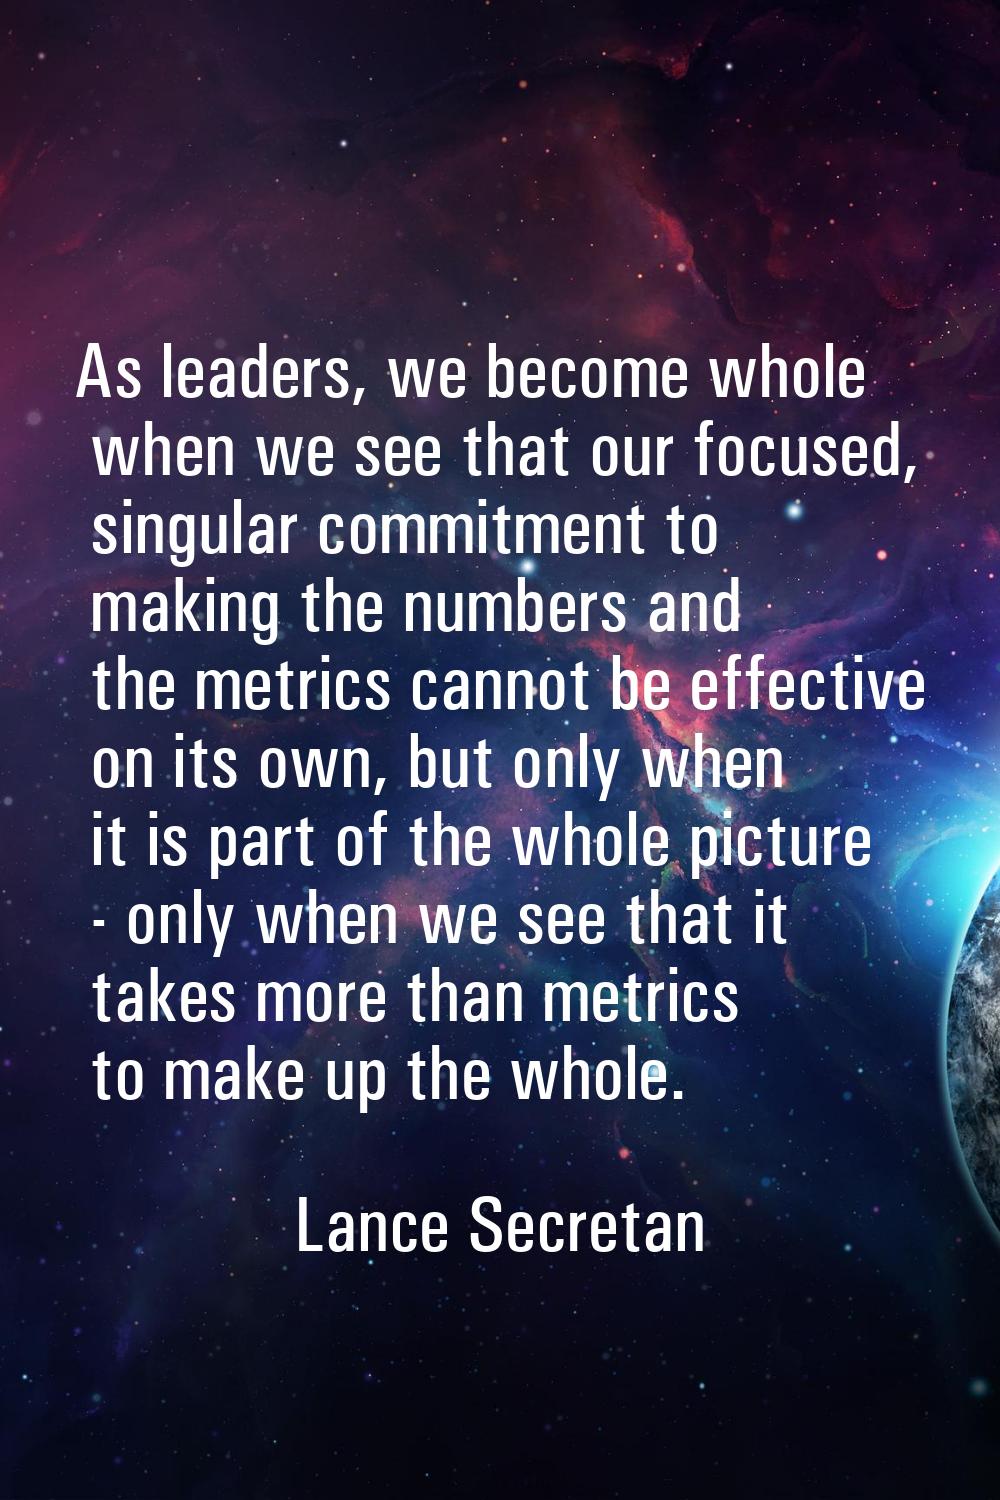 As leaders, we become whole when we see that our focused, singular commitment to making the numbers